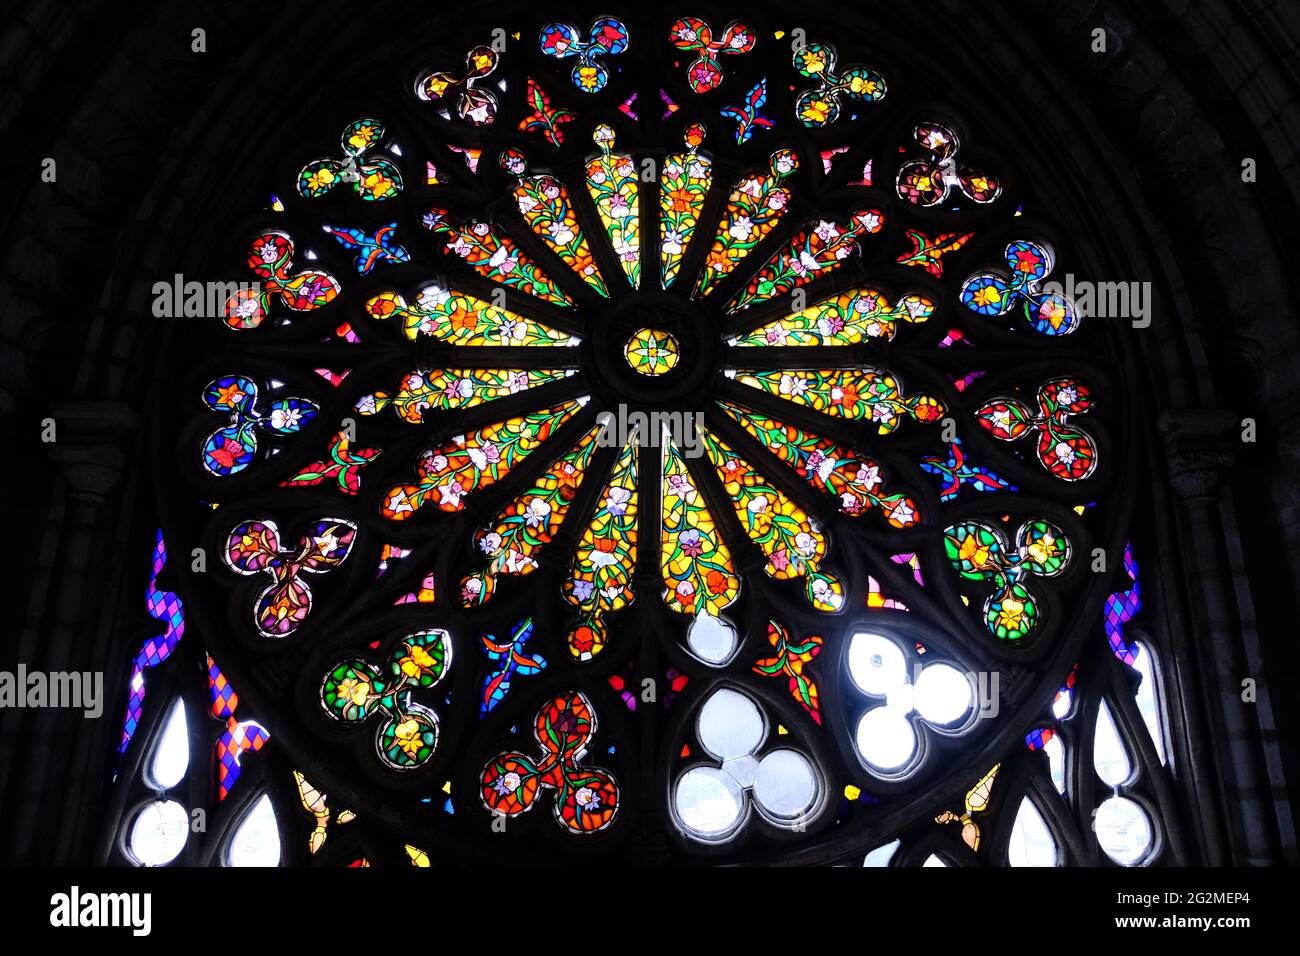 Ecuador Quito - Church Basilica of the National Vow - Stained Glass Mosaic Rose window Stock Photo